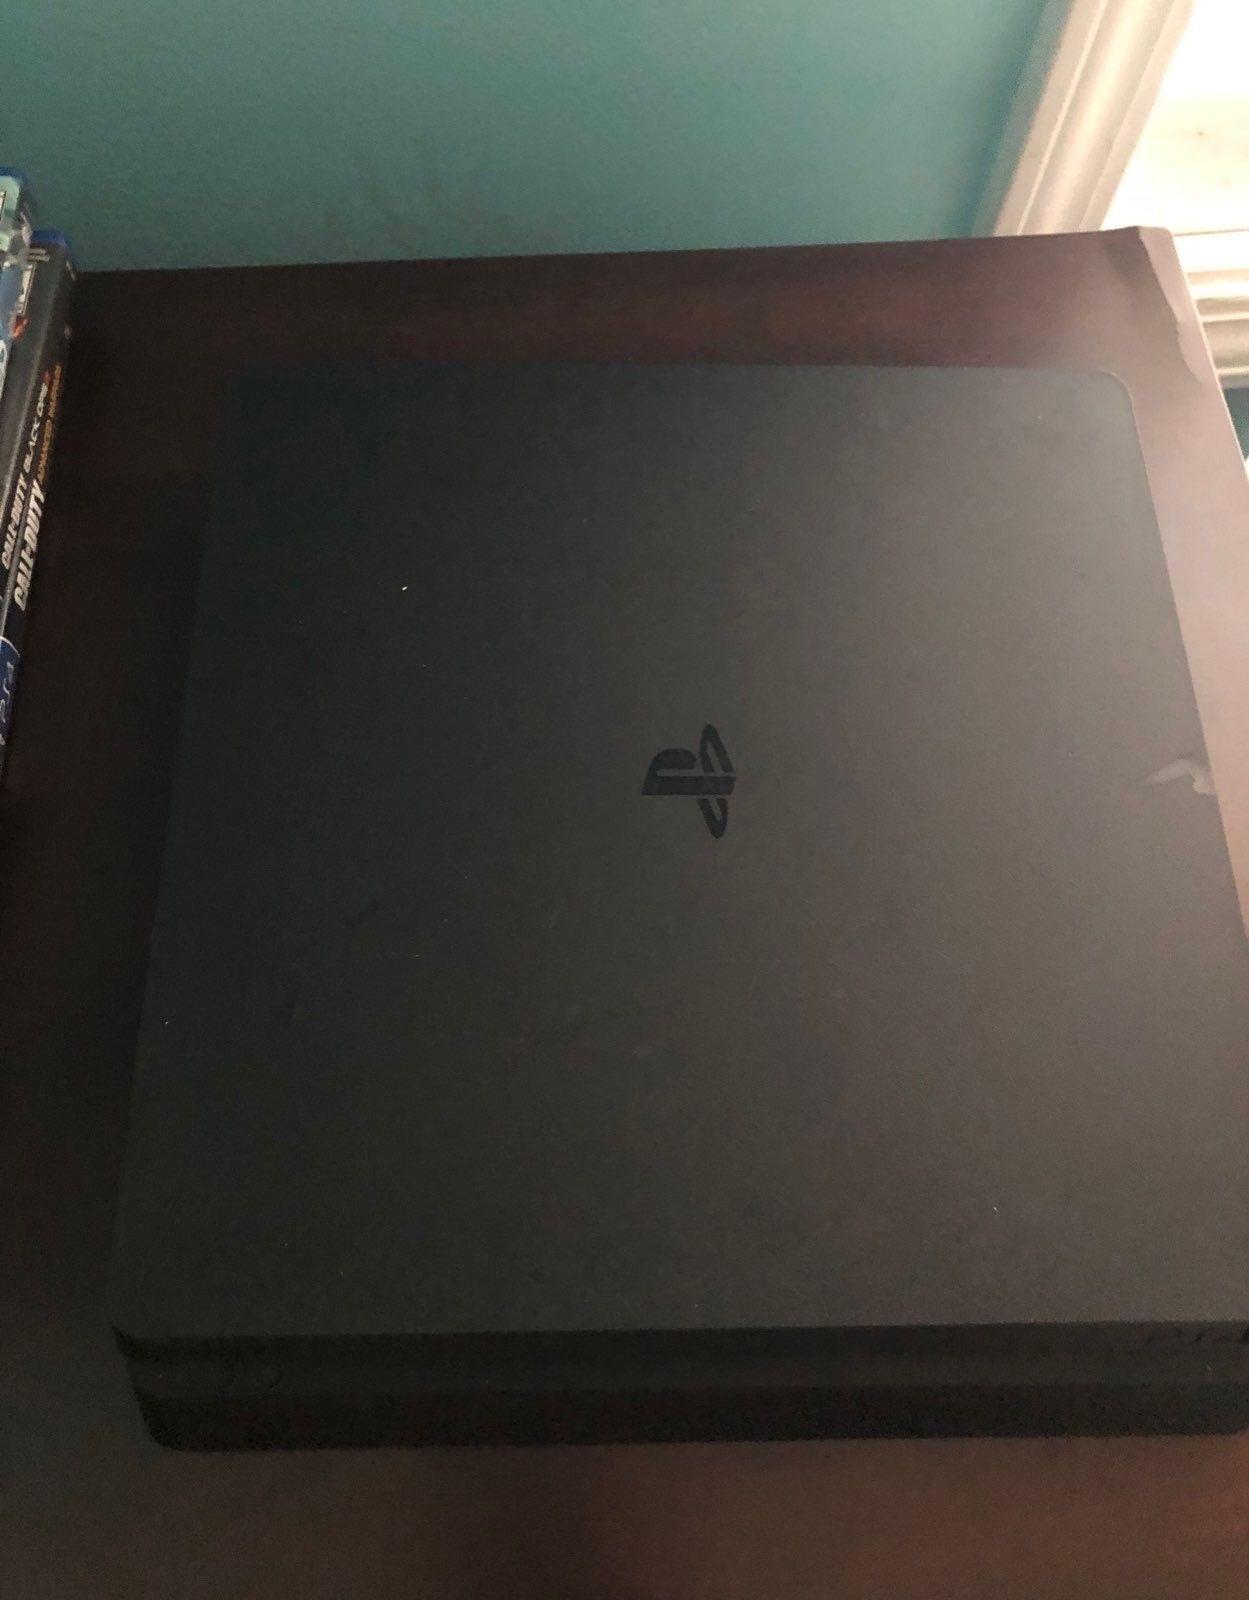 SONY PS4 pro 1TB with Controller and Cord